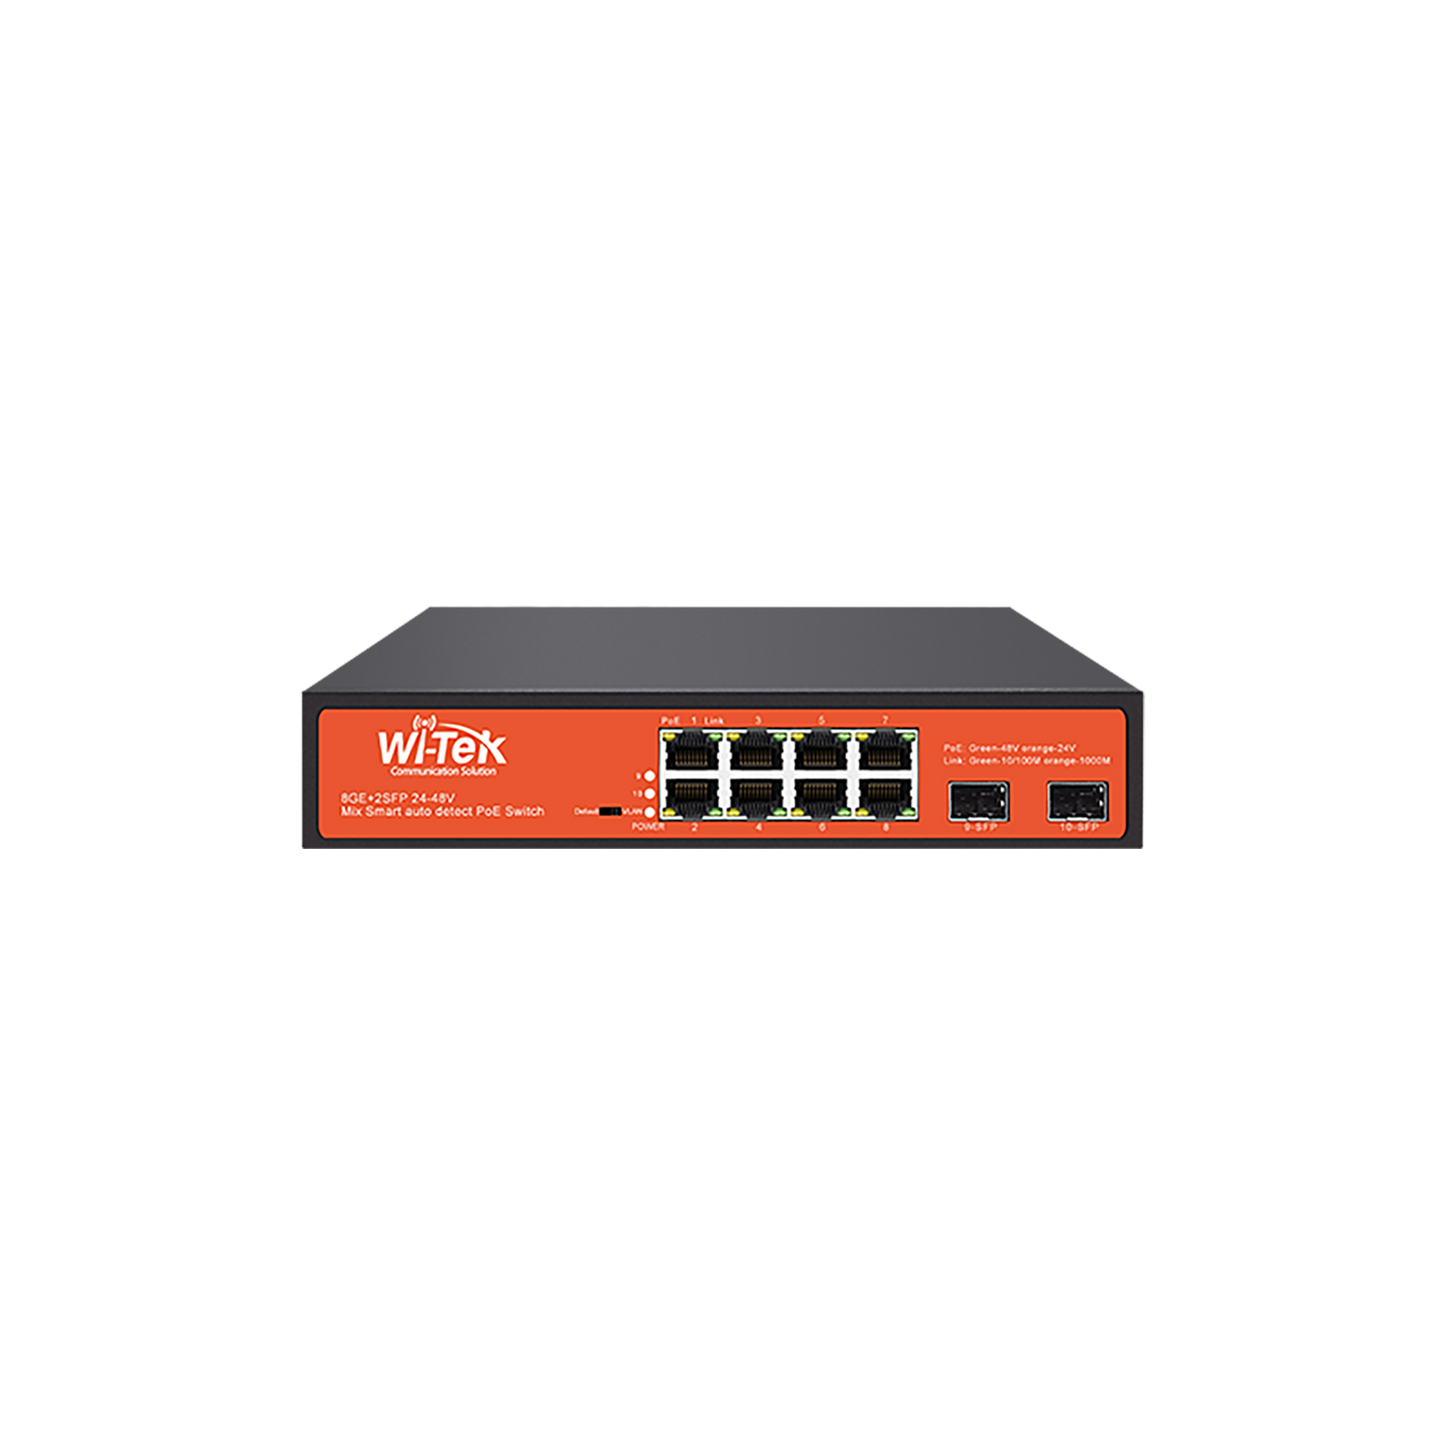 8-Port PoE Switch, 8 PoE+ and 2 SFP Ports, Smart Switch with Cloud